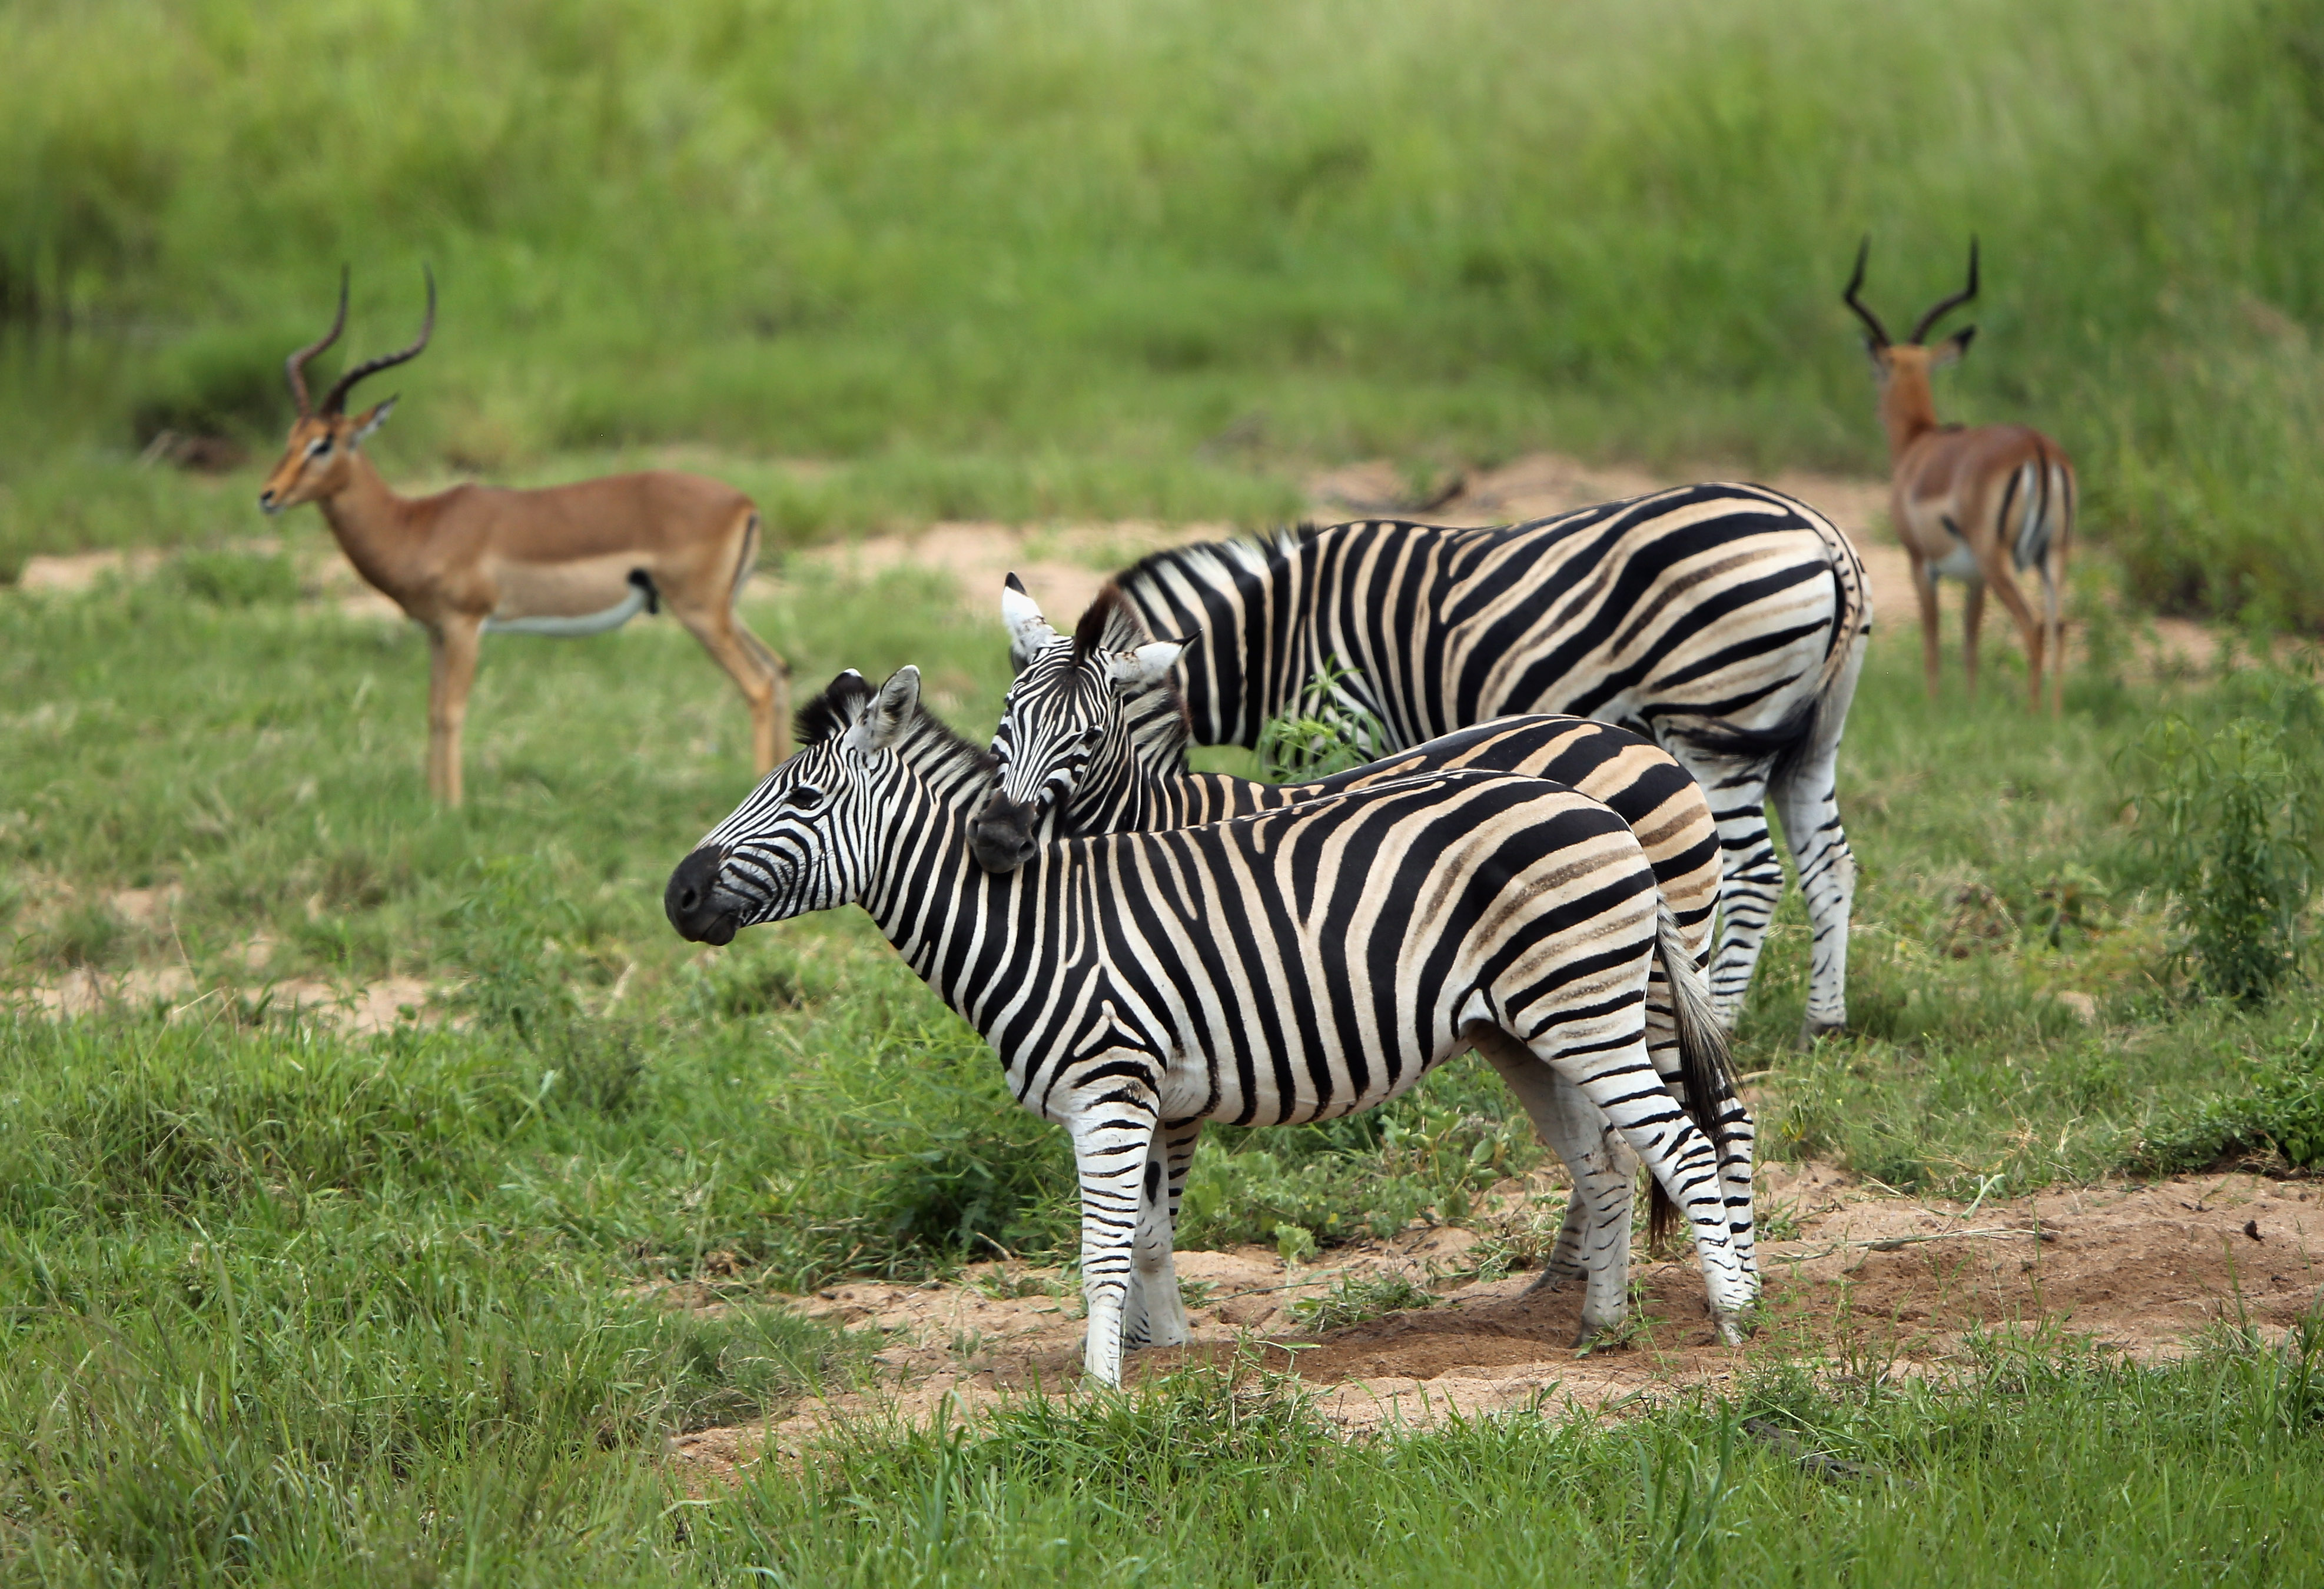 SKUKUZA, SOUTH AFRICA - FEBRUARY 06: A zebraa are pictured in Kruger National Park on February 6, 2013 in Skukuza, South Africa. (Photo by Ian Walton/Getty Images)